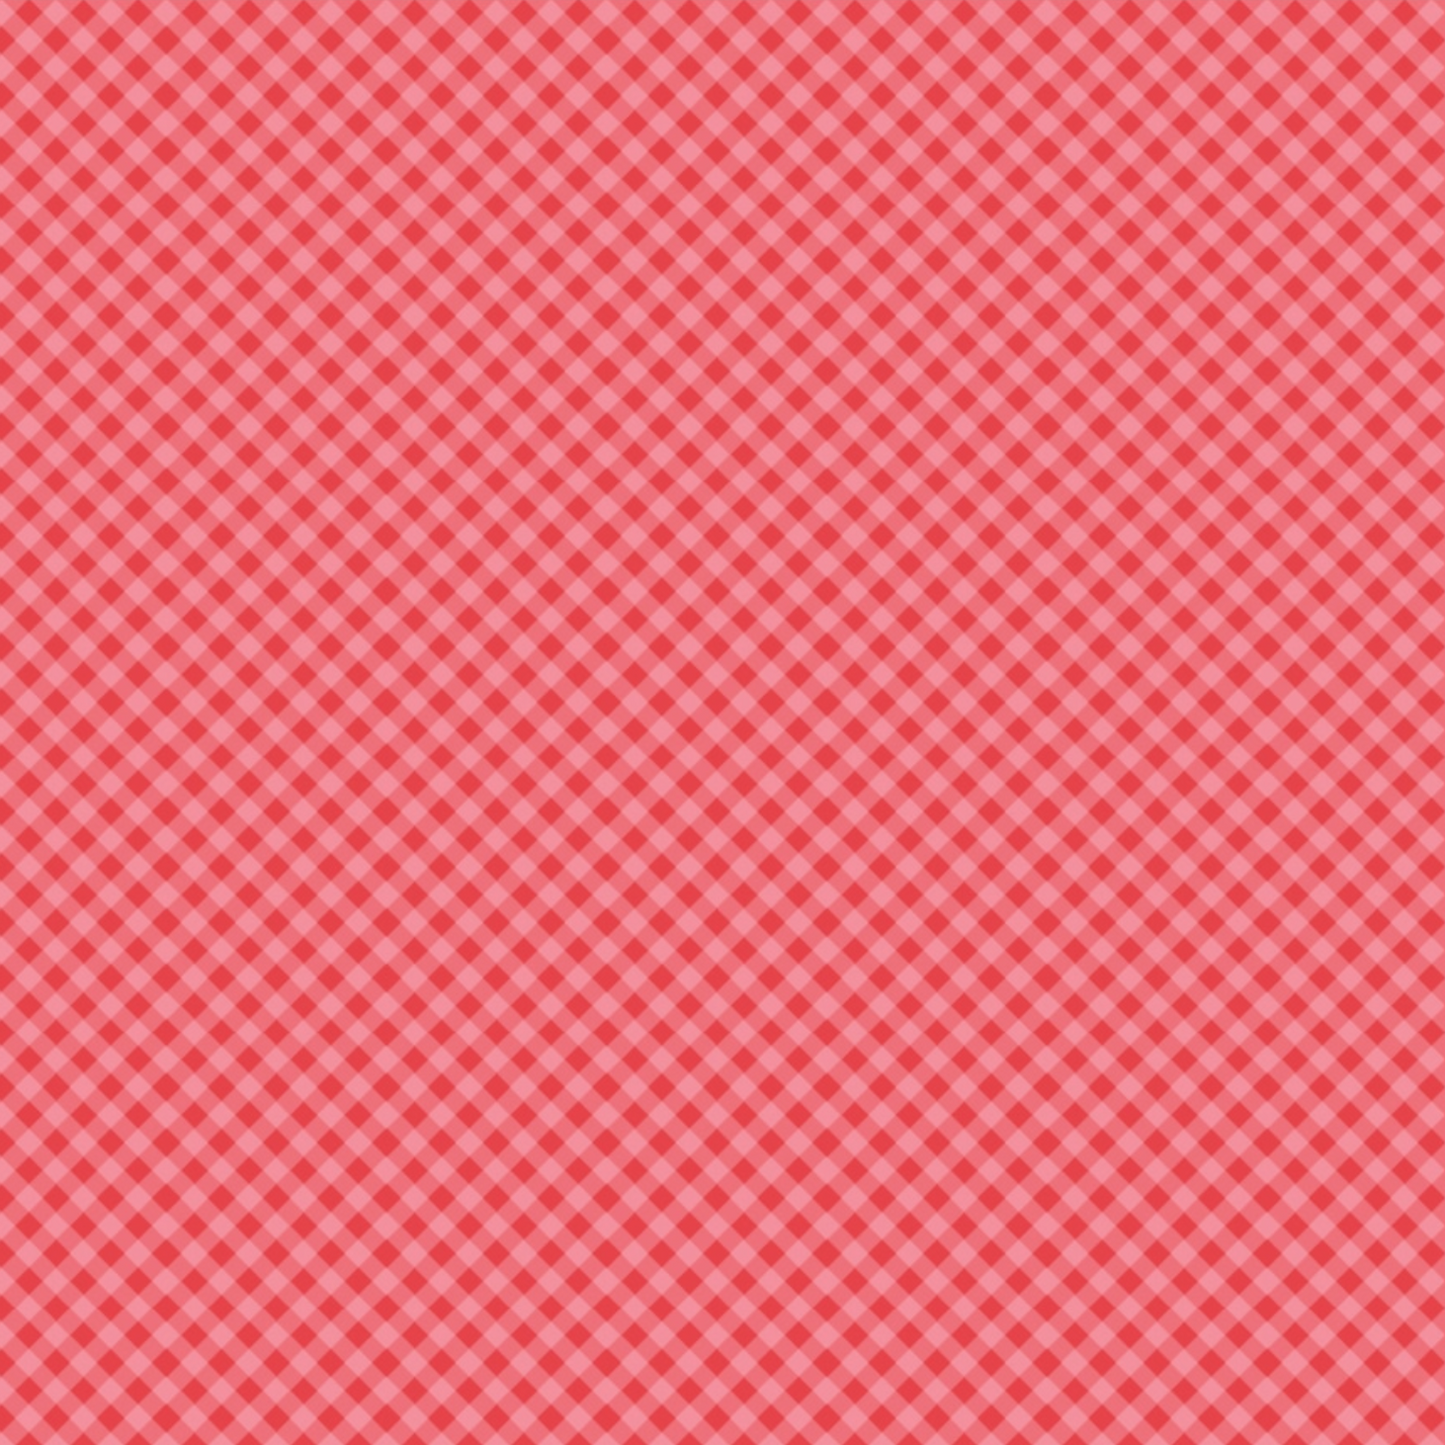 Prairie Sisters Homestead Gingham Forever Red PH23410, sold by the 1/2 yard